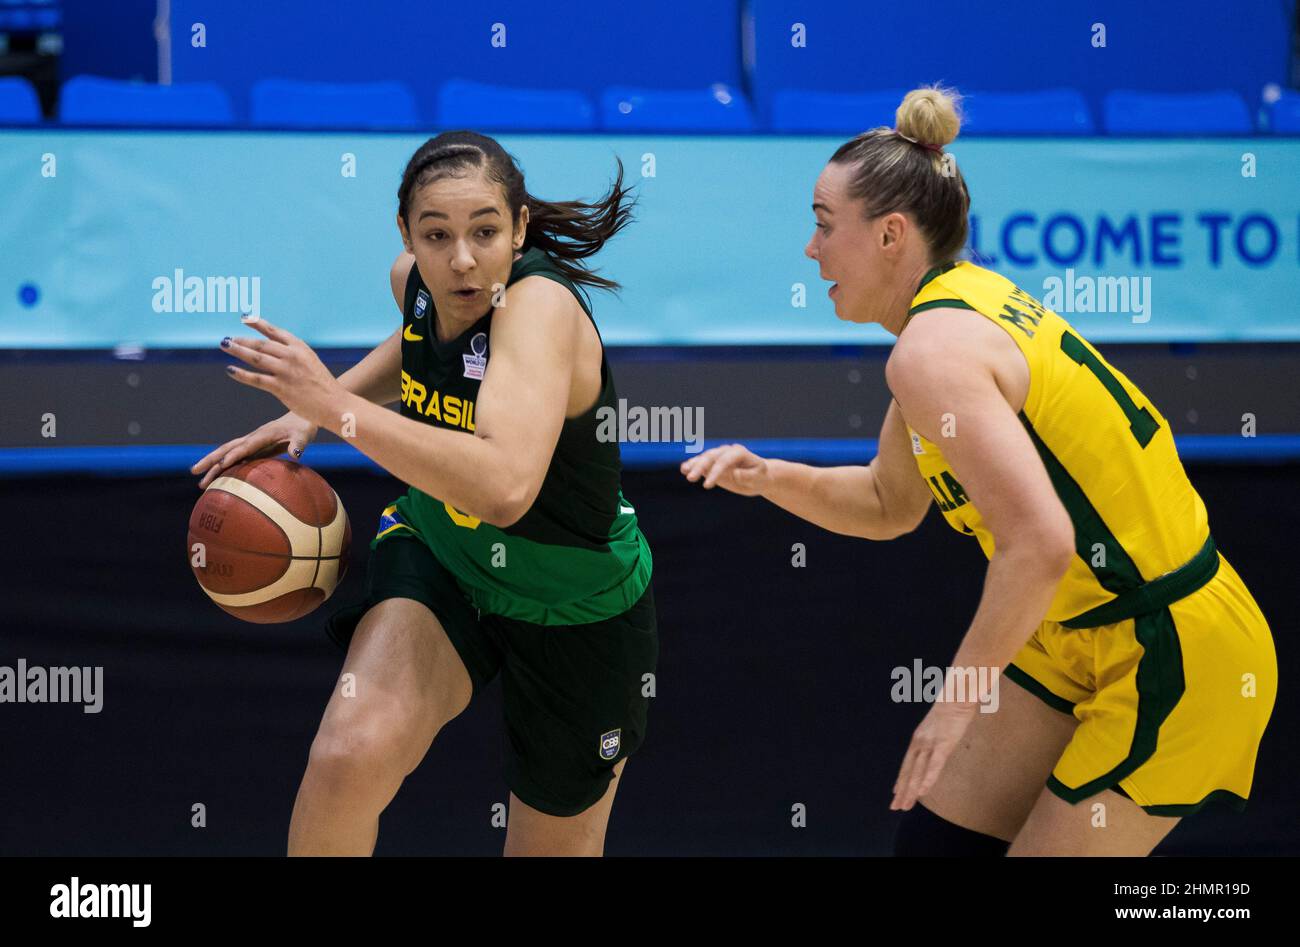 Belgrade, Serbia, 10th February 2022. Taina Paixao of Brazil drives to the basket during the FIBA Women's Basketball World Cup Qualifying Tournament match between Australia v Brazil in Belgrade, Serbia. February 10, 2022. Credit: Nikola Krstic/Alamy Stock Photo